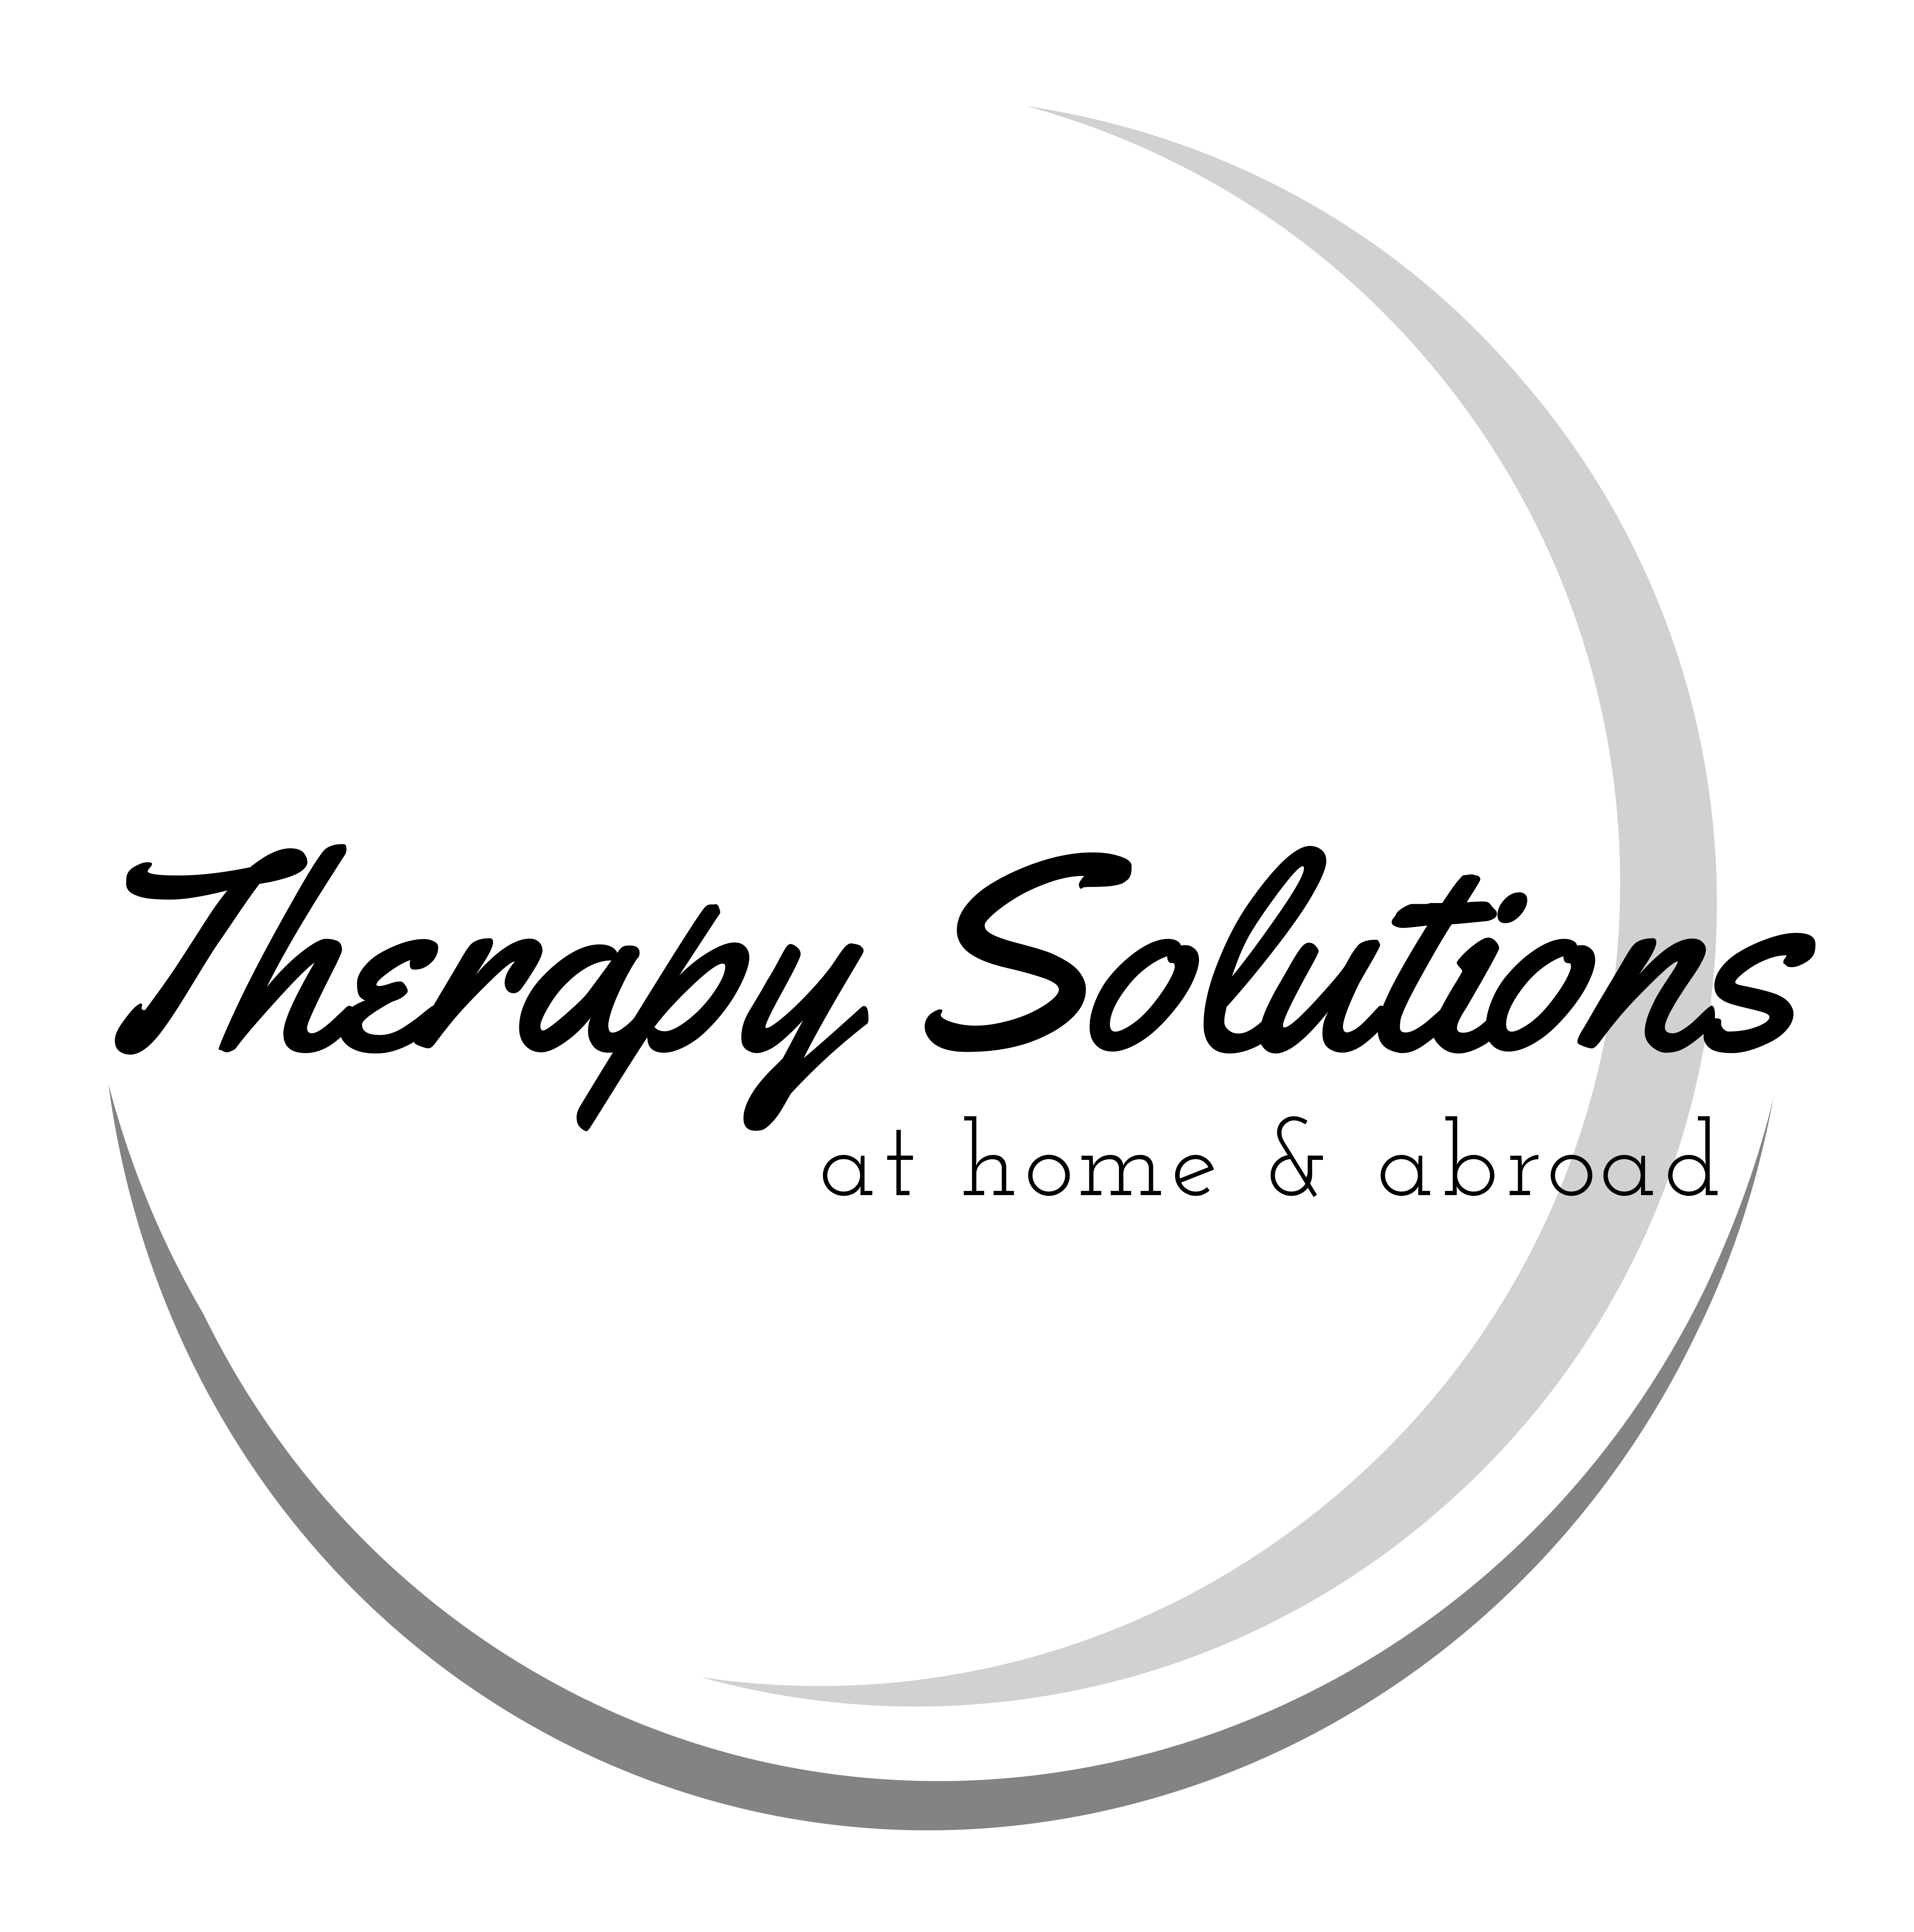 Find a Psychologist - Therapy Solutions, LLC